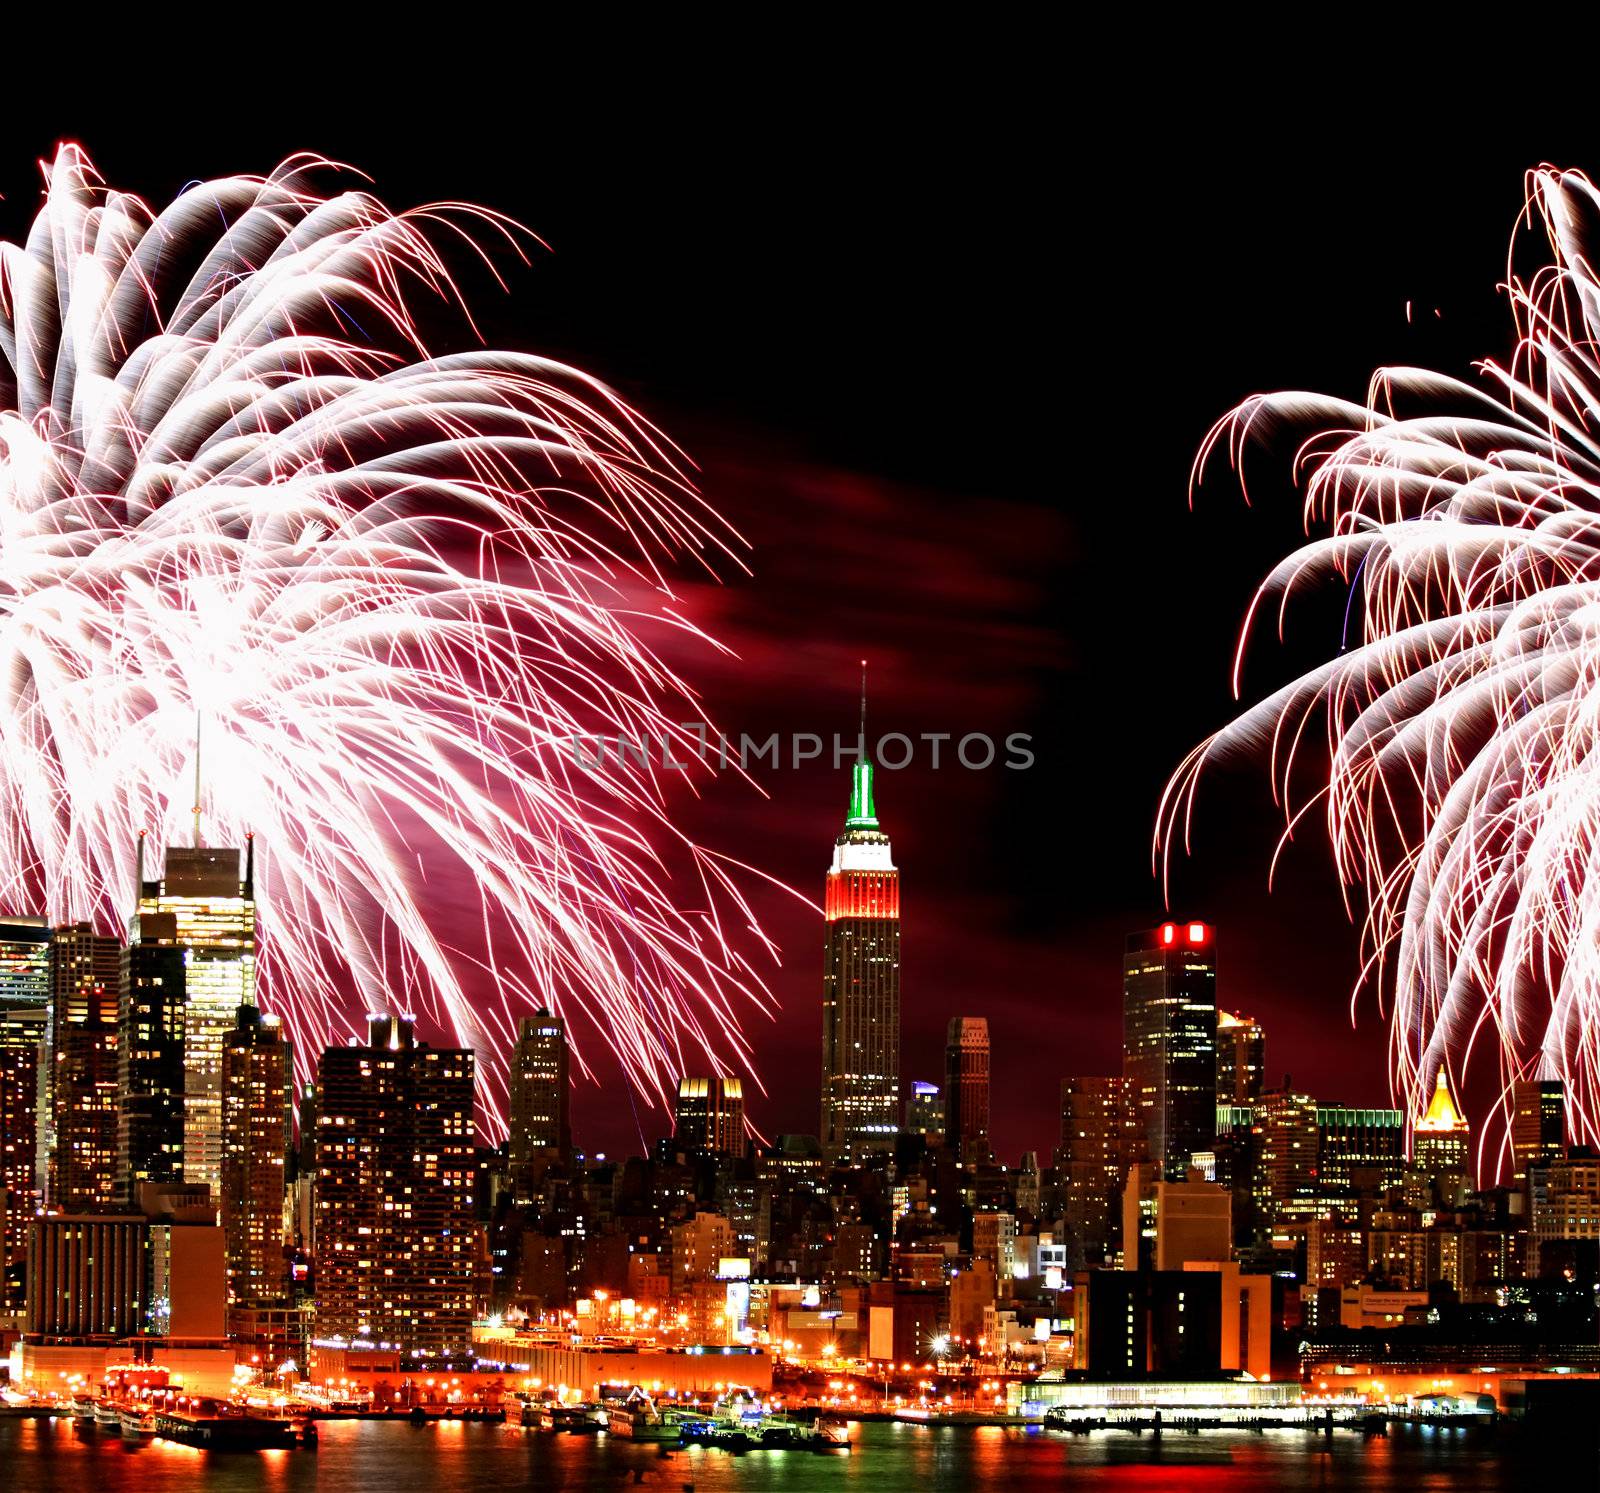 The New York City skyline and fireworks by gary718